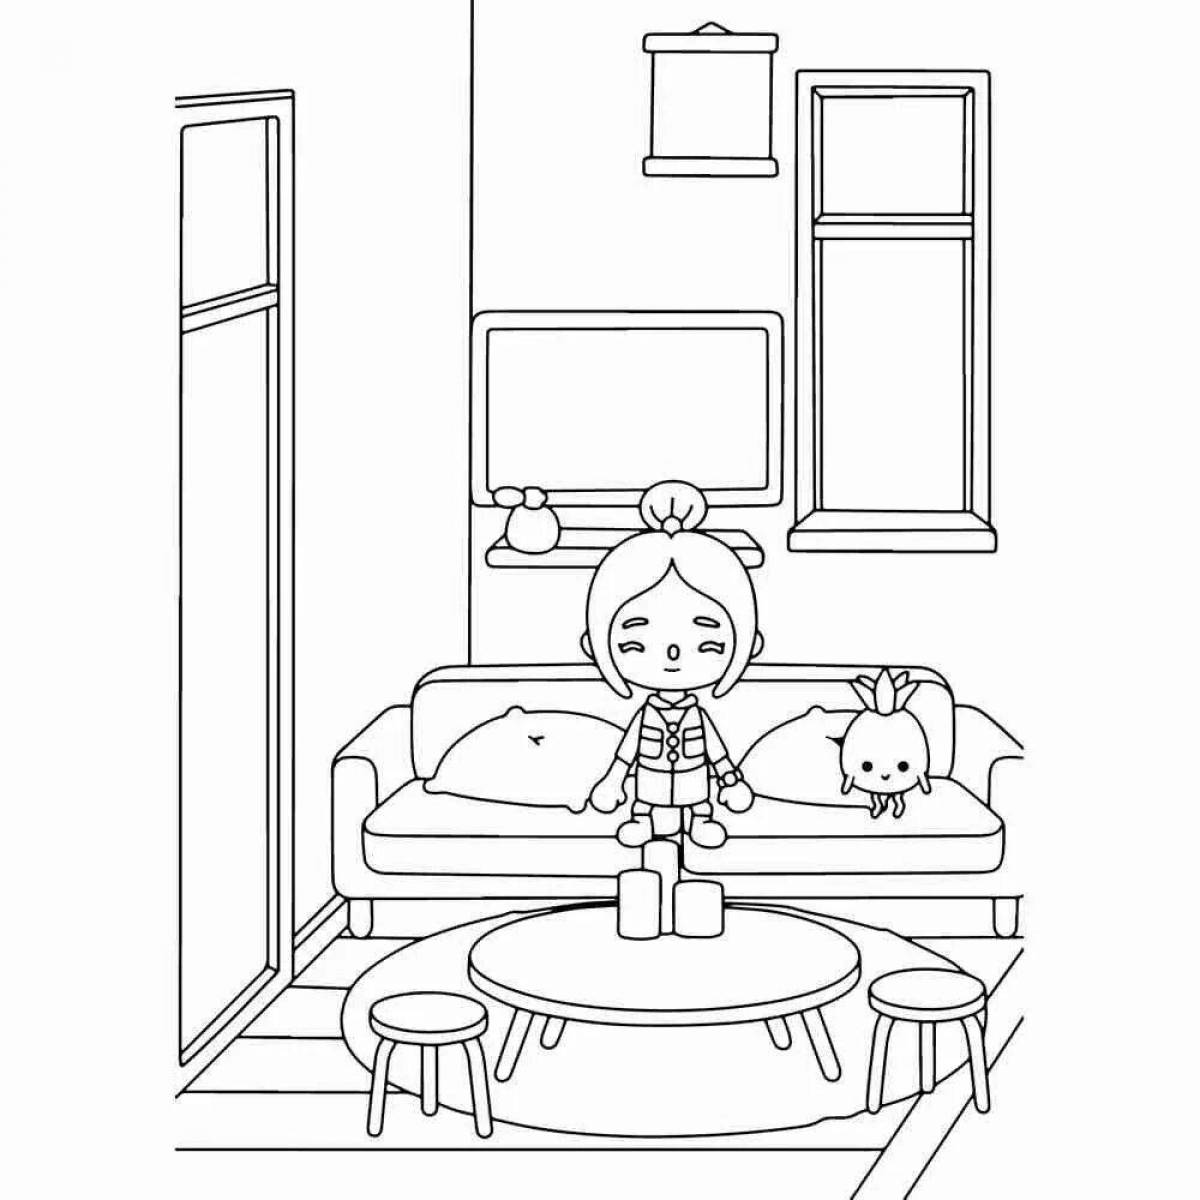 Luminous side furniture coloring page